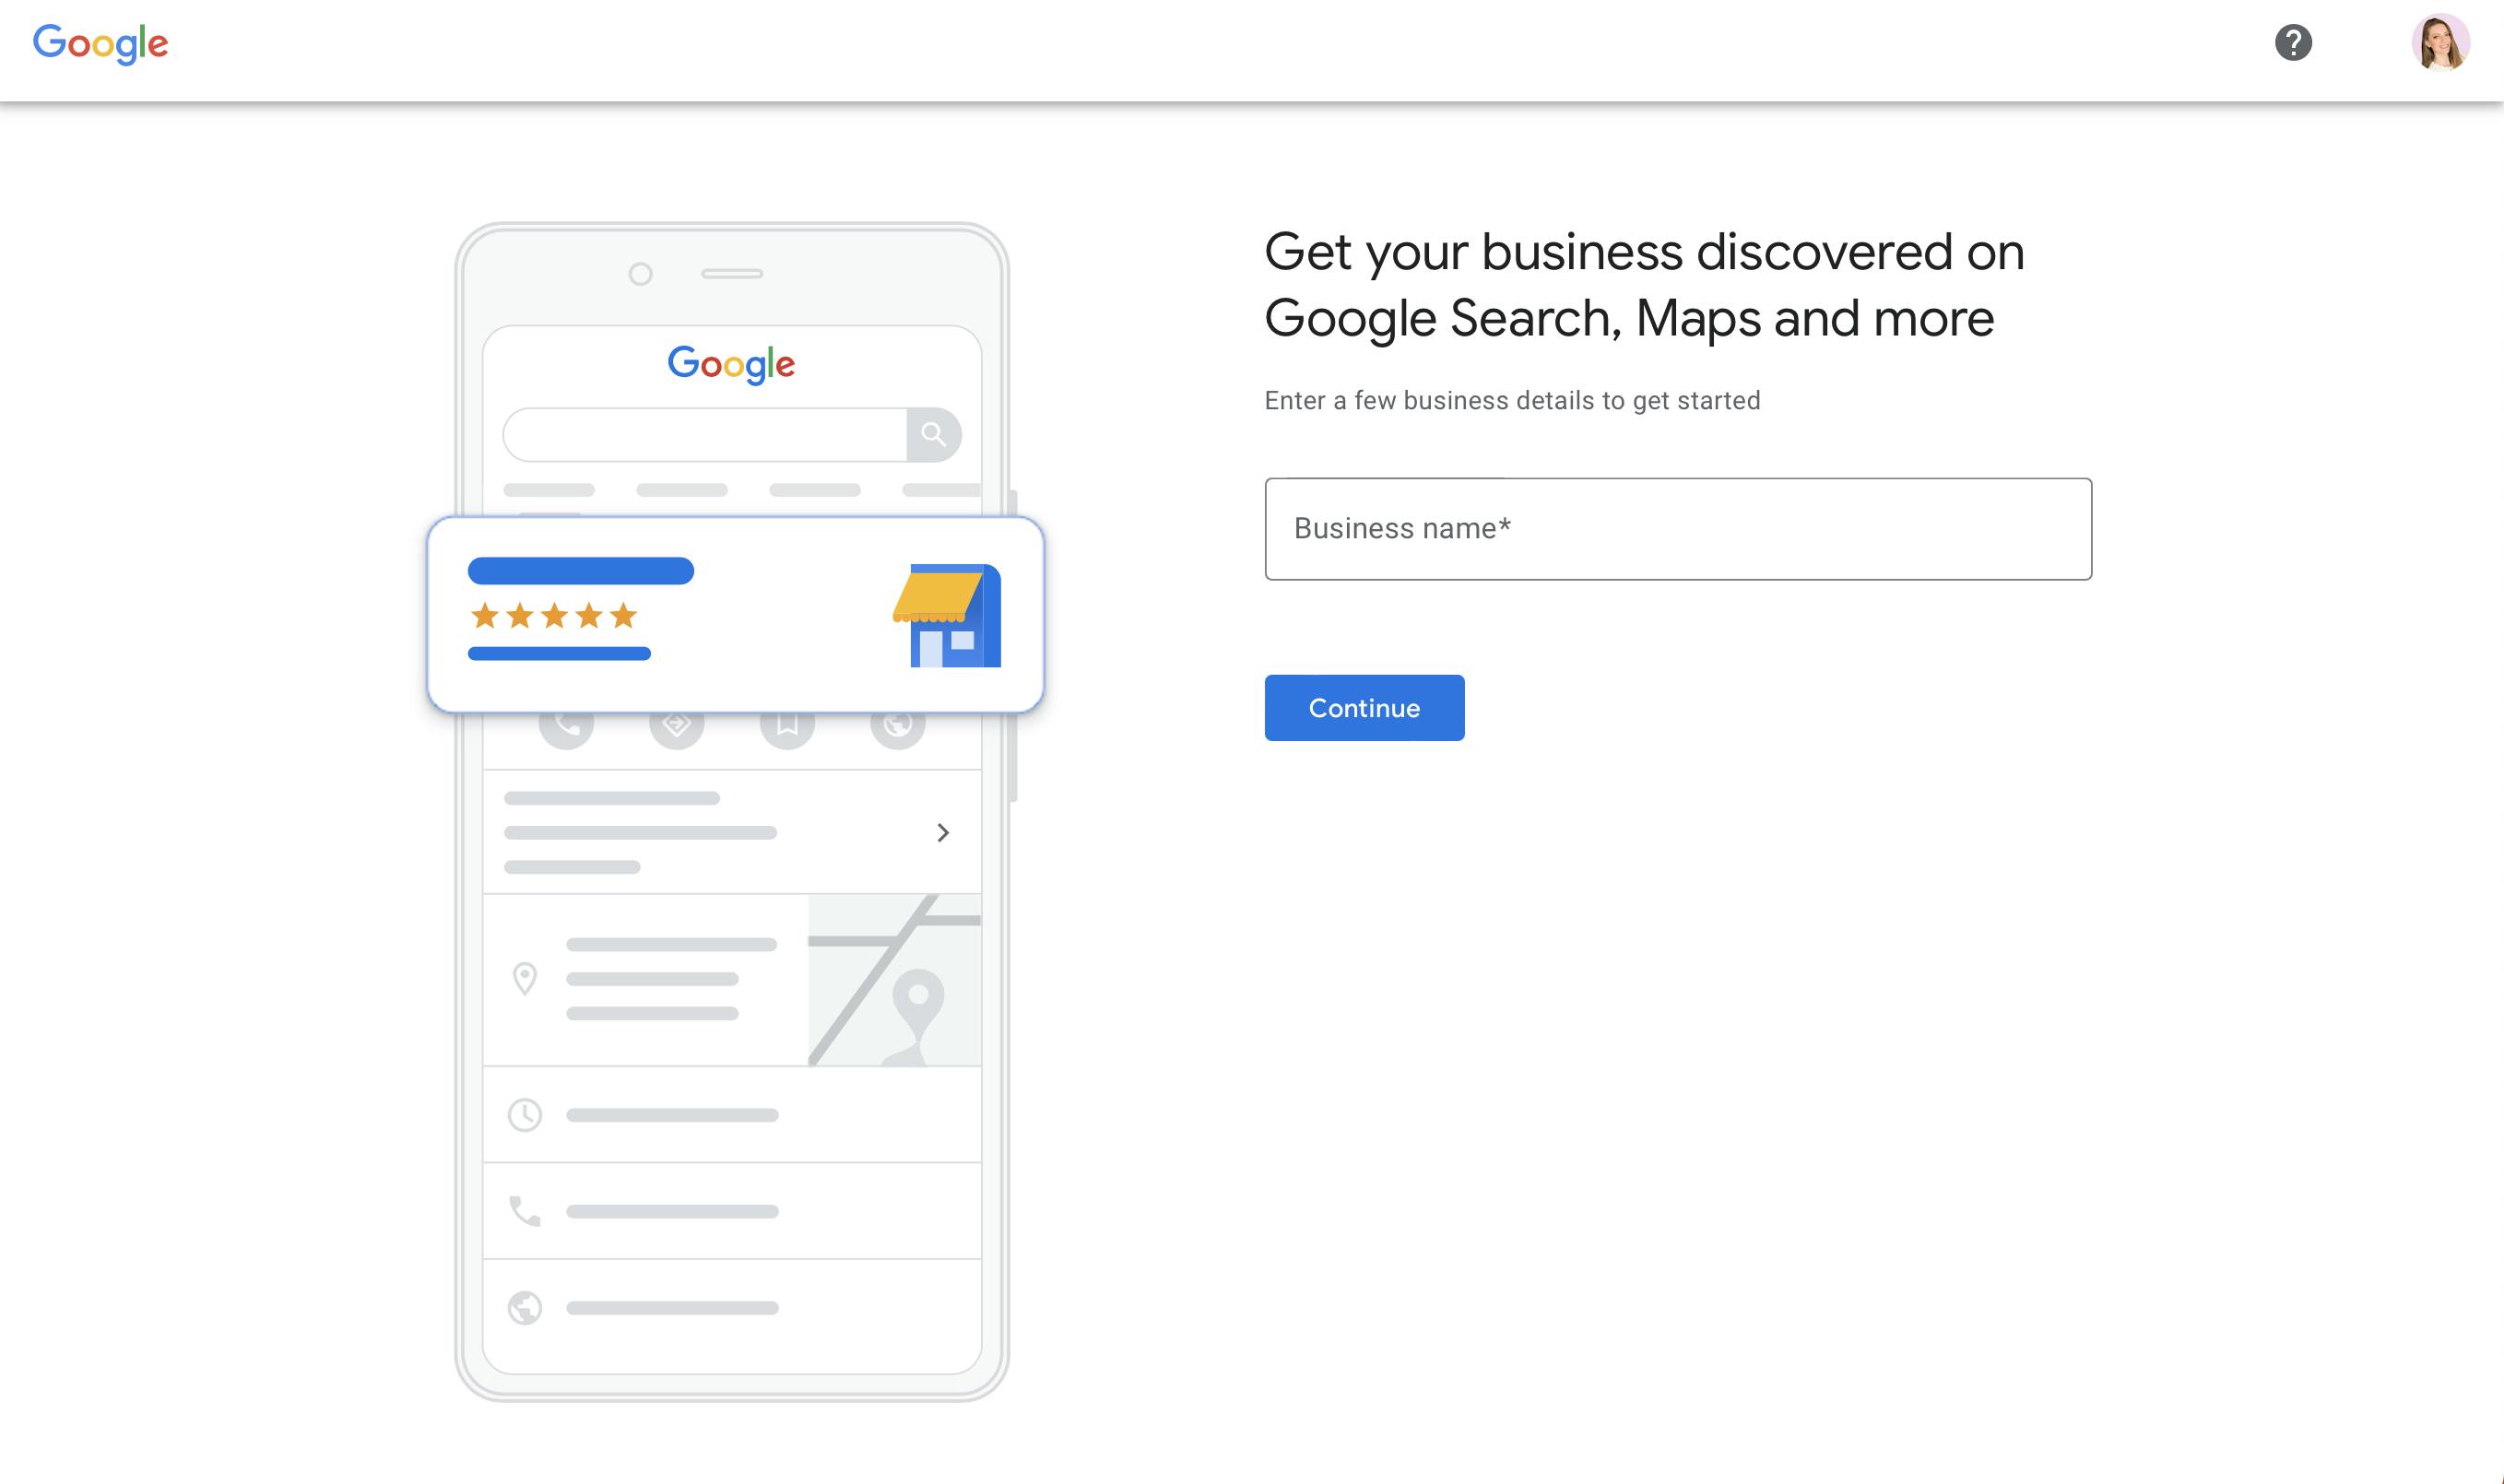 Visit https://business.google.com/locations to set up a new GMB page